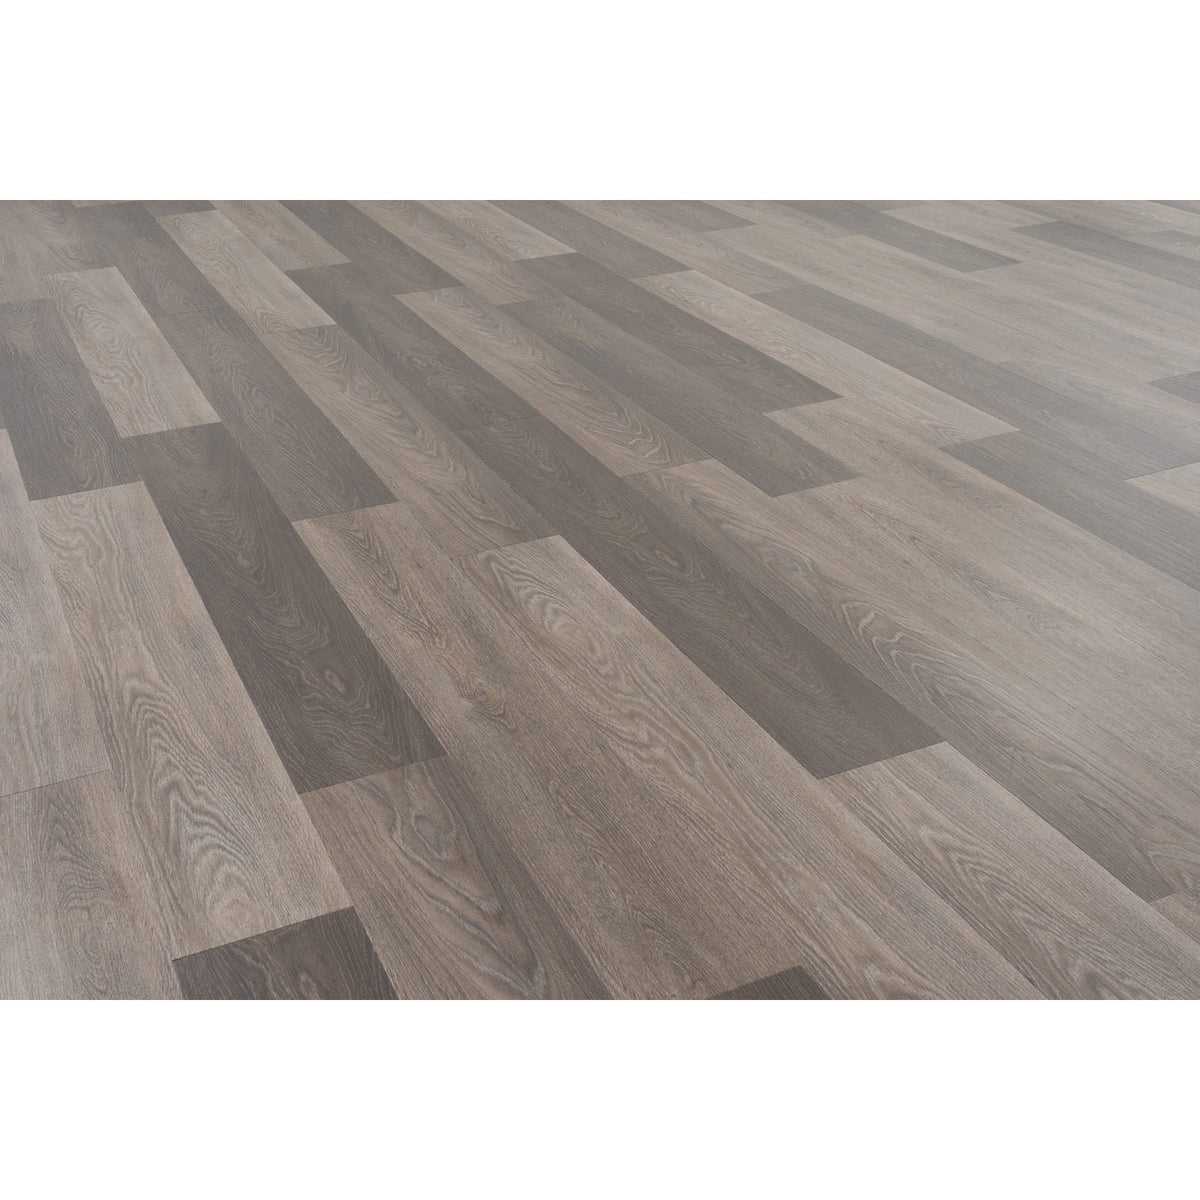 Provenza Floors - Uptown Chic Luxury Vinyl Plank - Forever Friends